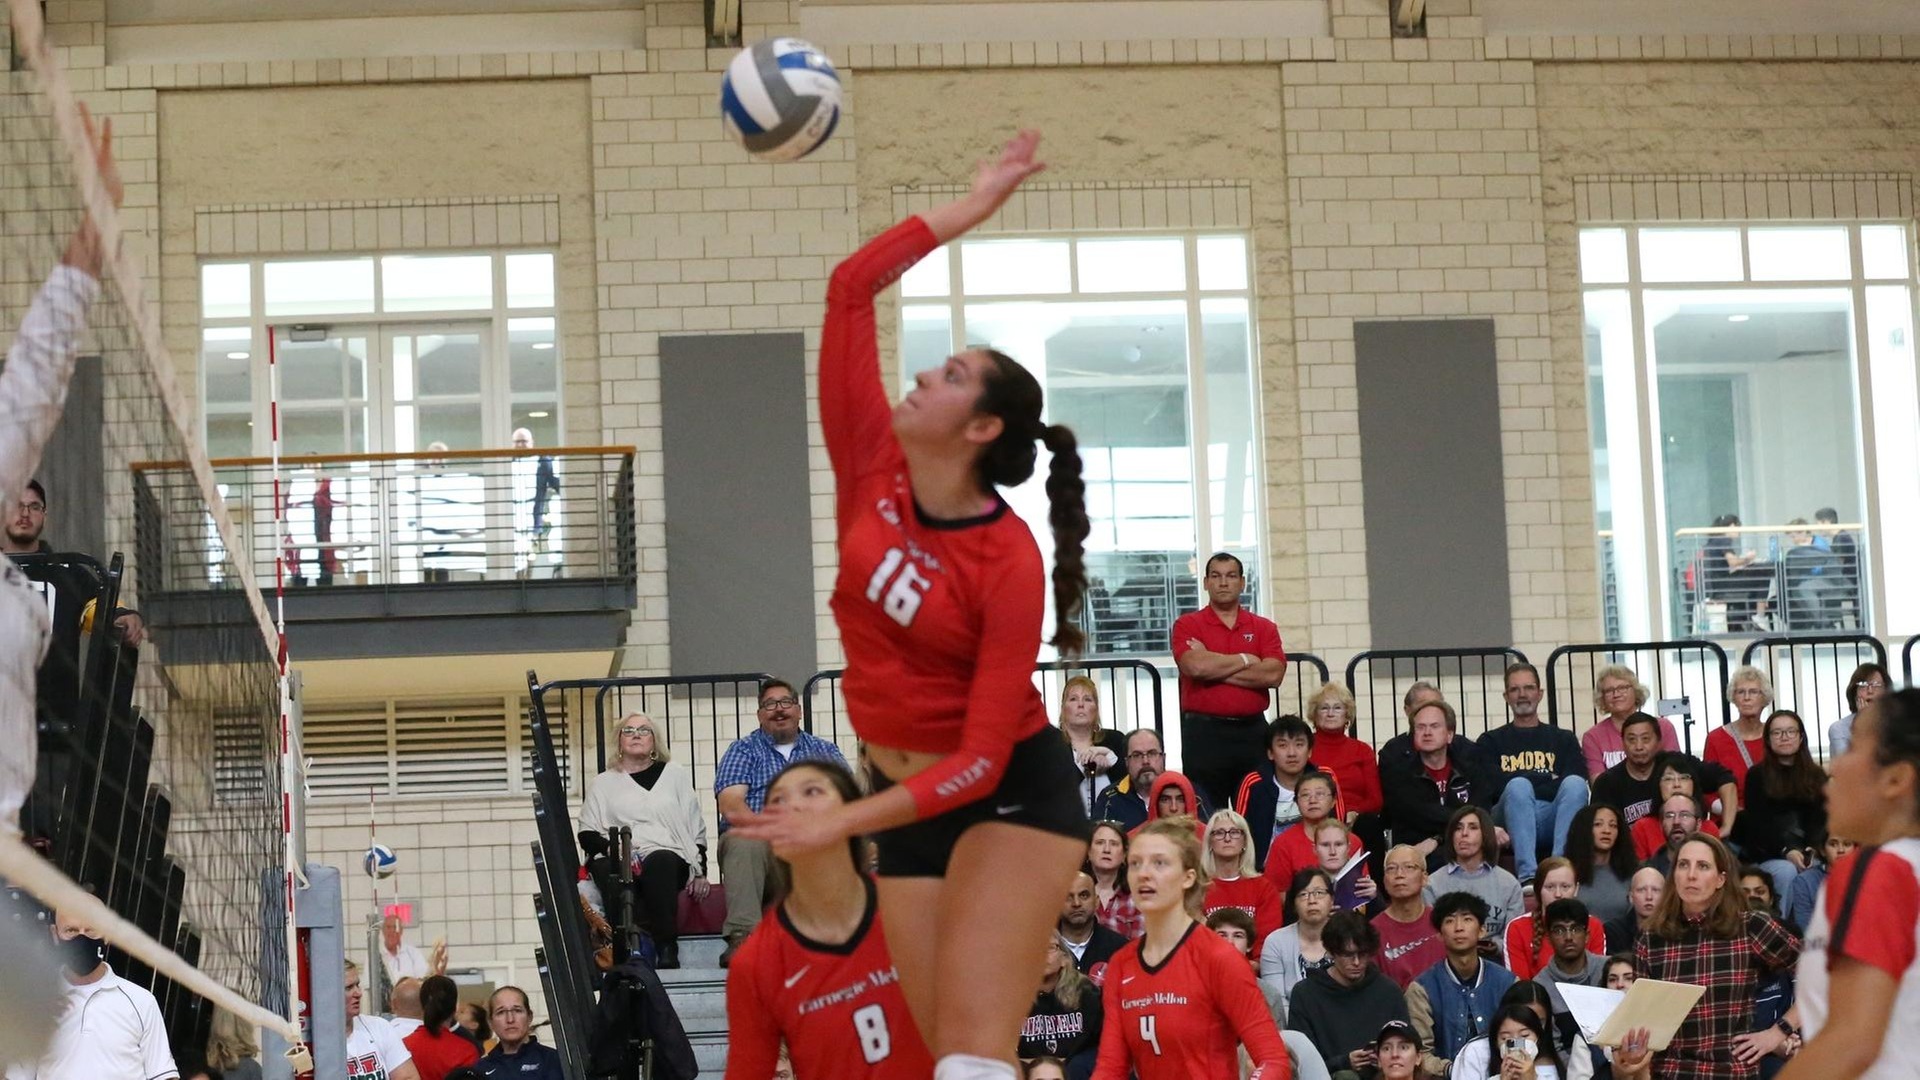 women's volleyball player wearing a red jersey jumping and swinging right arm at the ball